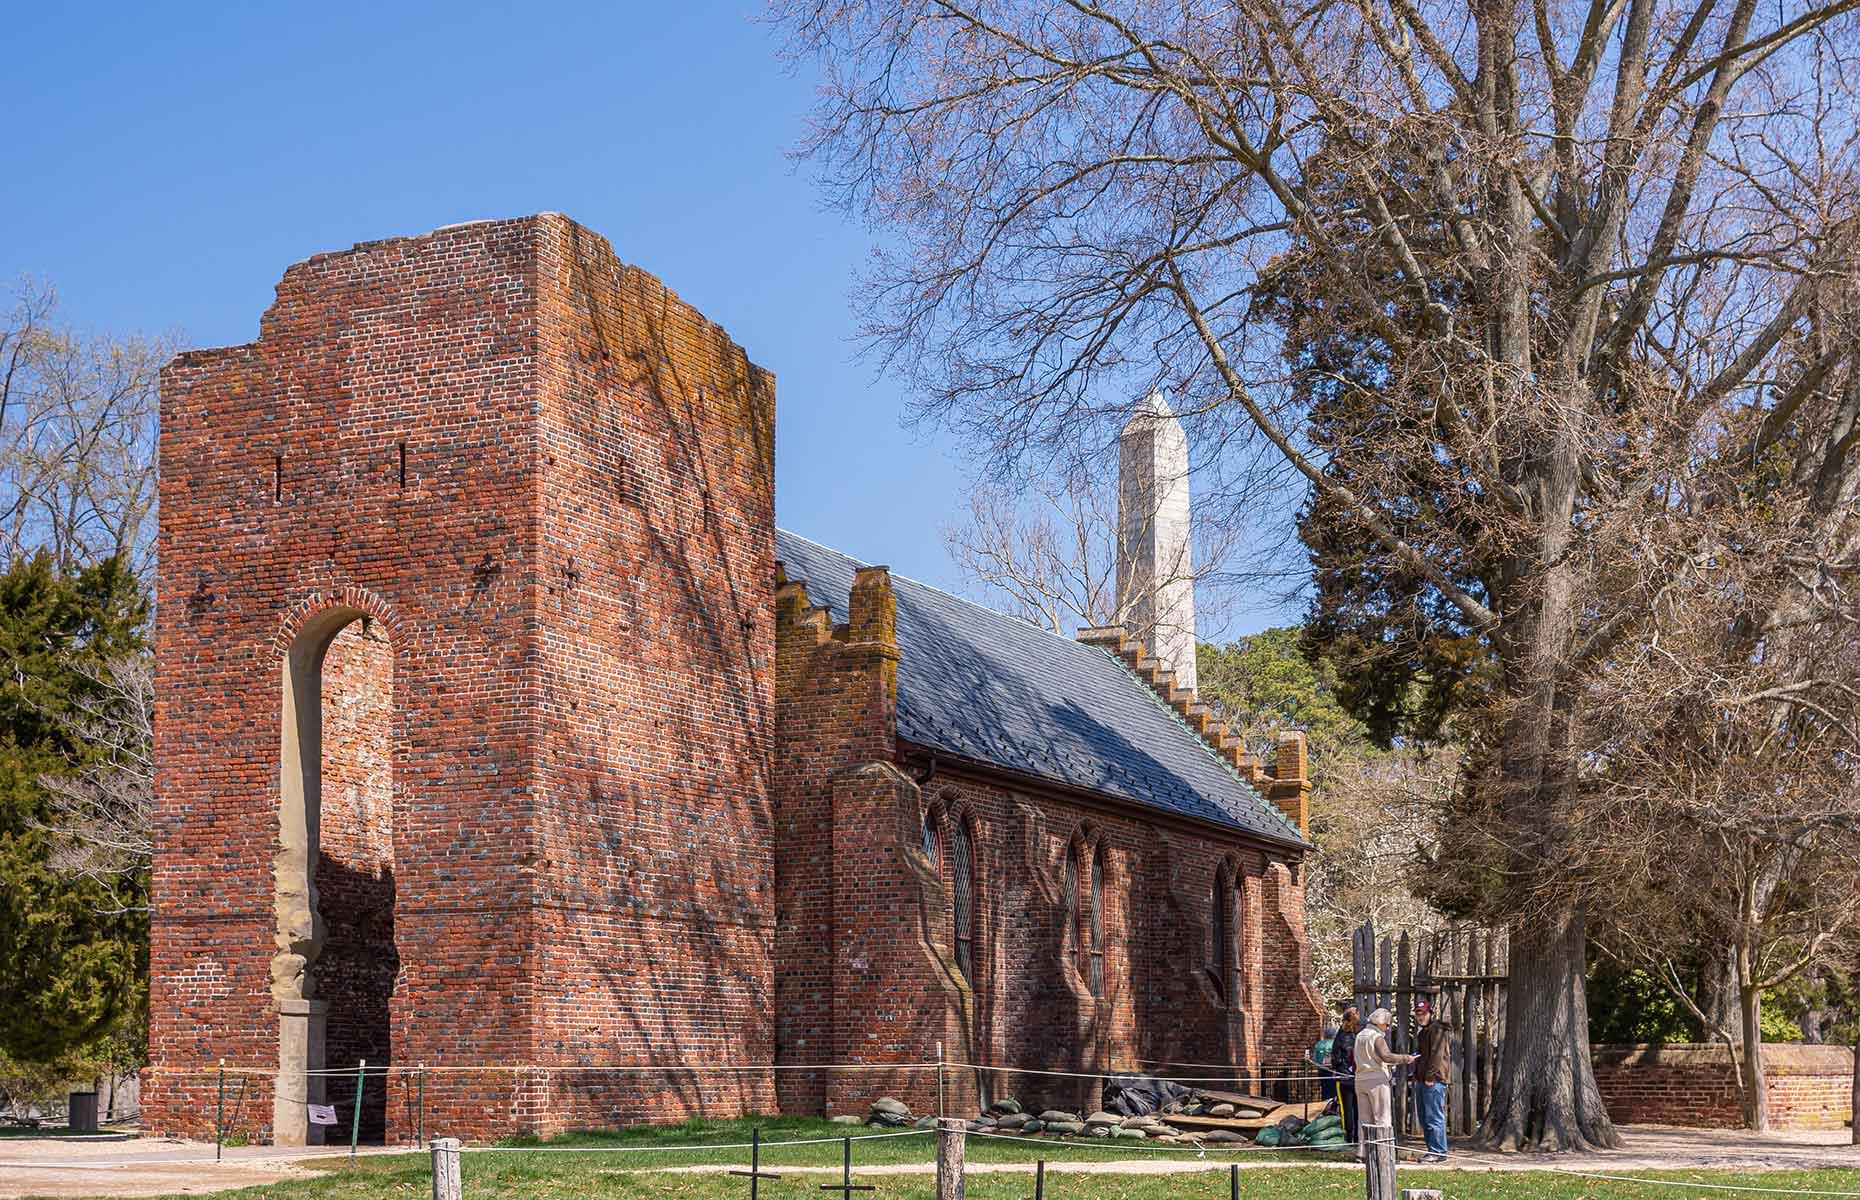 <p>Head to Jamestown, home of America's first permanent English settlement, to see a number of <a href="https://historicjamestowne.org/visit/plan-your-visit/17th-century-church-tower/">still-standing structures</a> dating from the early 17th century onwards, including this brick tower from 1639. Beneath it is the foundation of a church from 1617, which is still visible through glass panels. There's plenty of Native American history in Virginia too – Ely Mound is an ancient earthwork <a href="https://encyclopediavirginia.org/entries/ely-mound-archaeological-site/">built between AD 1200 and 1650</a> and while it’s not much to look at today, it yielded fascinating discoveries related to Native American burial practices.</p>  <p><a href="https://www.loveexploring.com/galleries/157022/ranked-virginias-most-charming-small-towns?page=1"><strong>Check out Virginia's most charming small towns</strong></a></p>